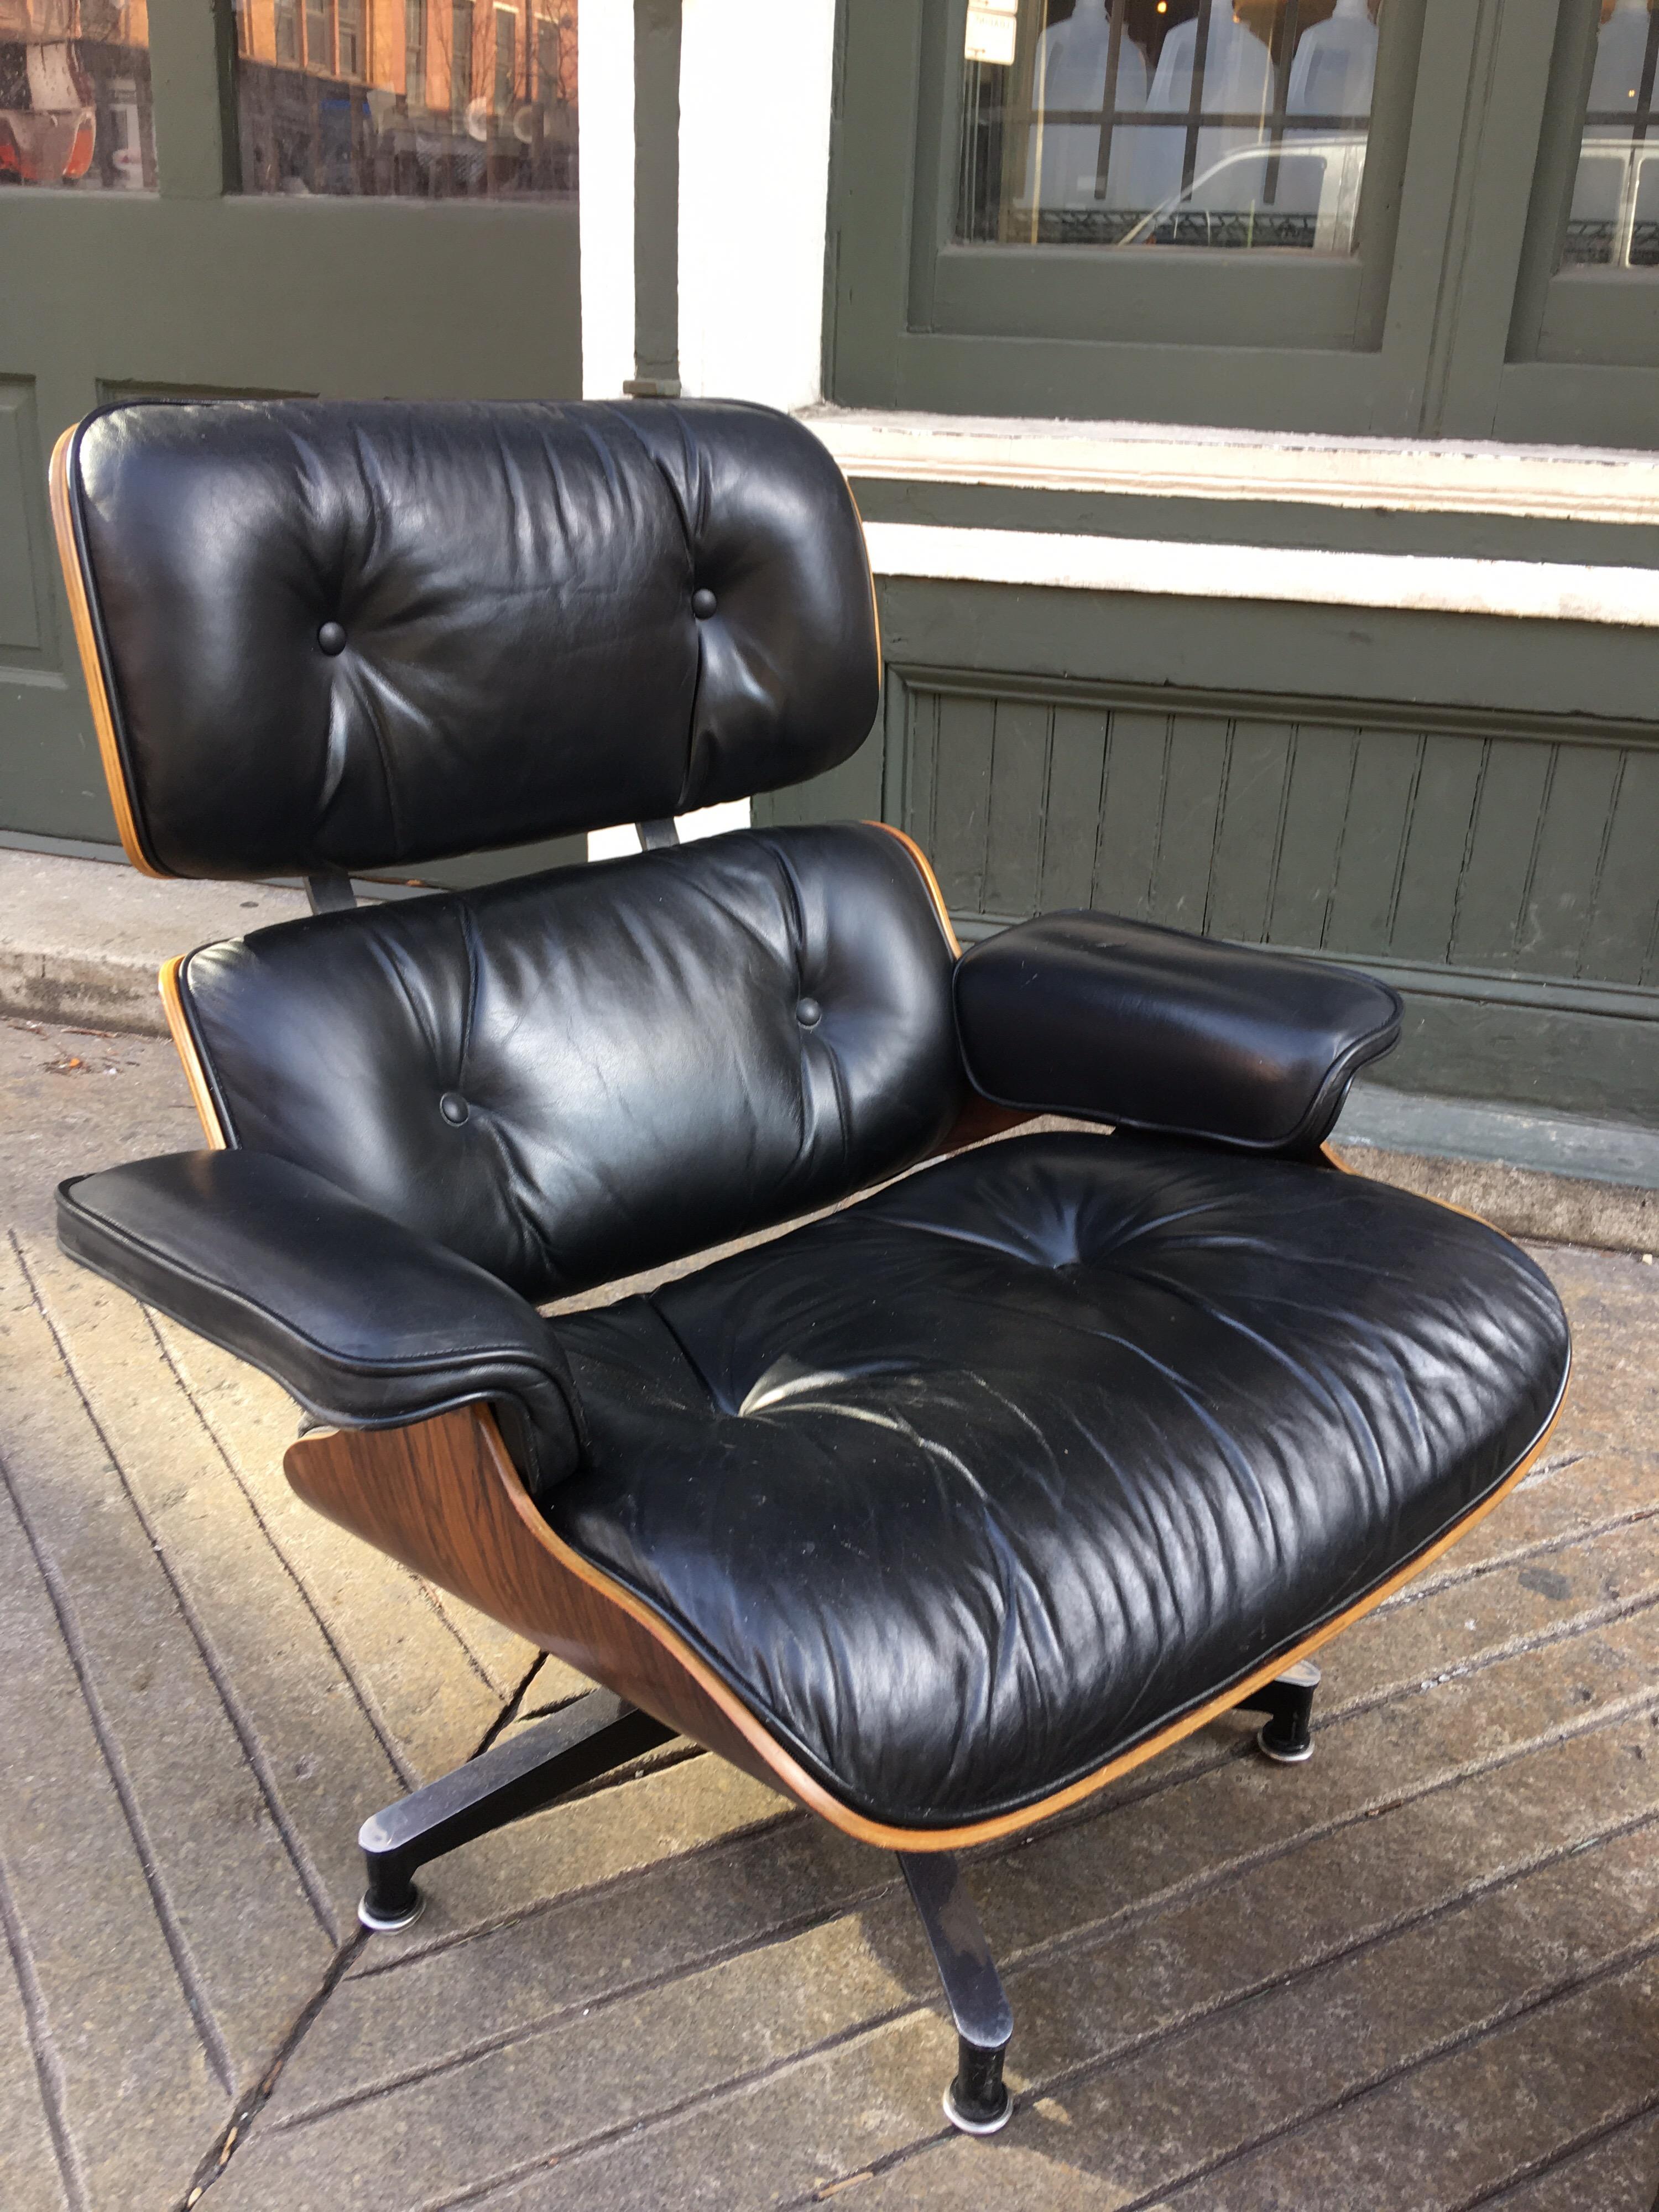 Charles Eames for Herman Miller Rosewood 670/71 lounge chair and ottoman from the 1970s bought from original owner. Chair is perfect except for two minor slits (not piercing leather) on one arm rest. Rosewood is beautifully grained. All feet glides